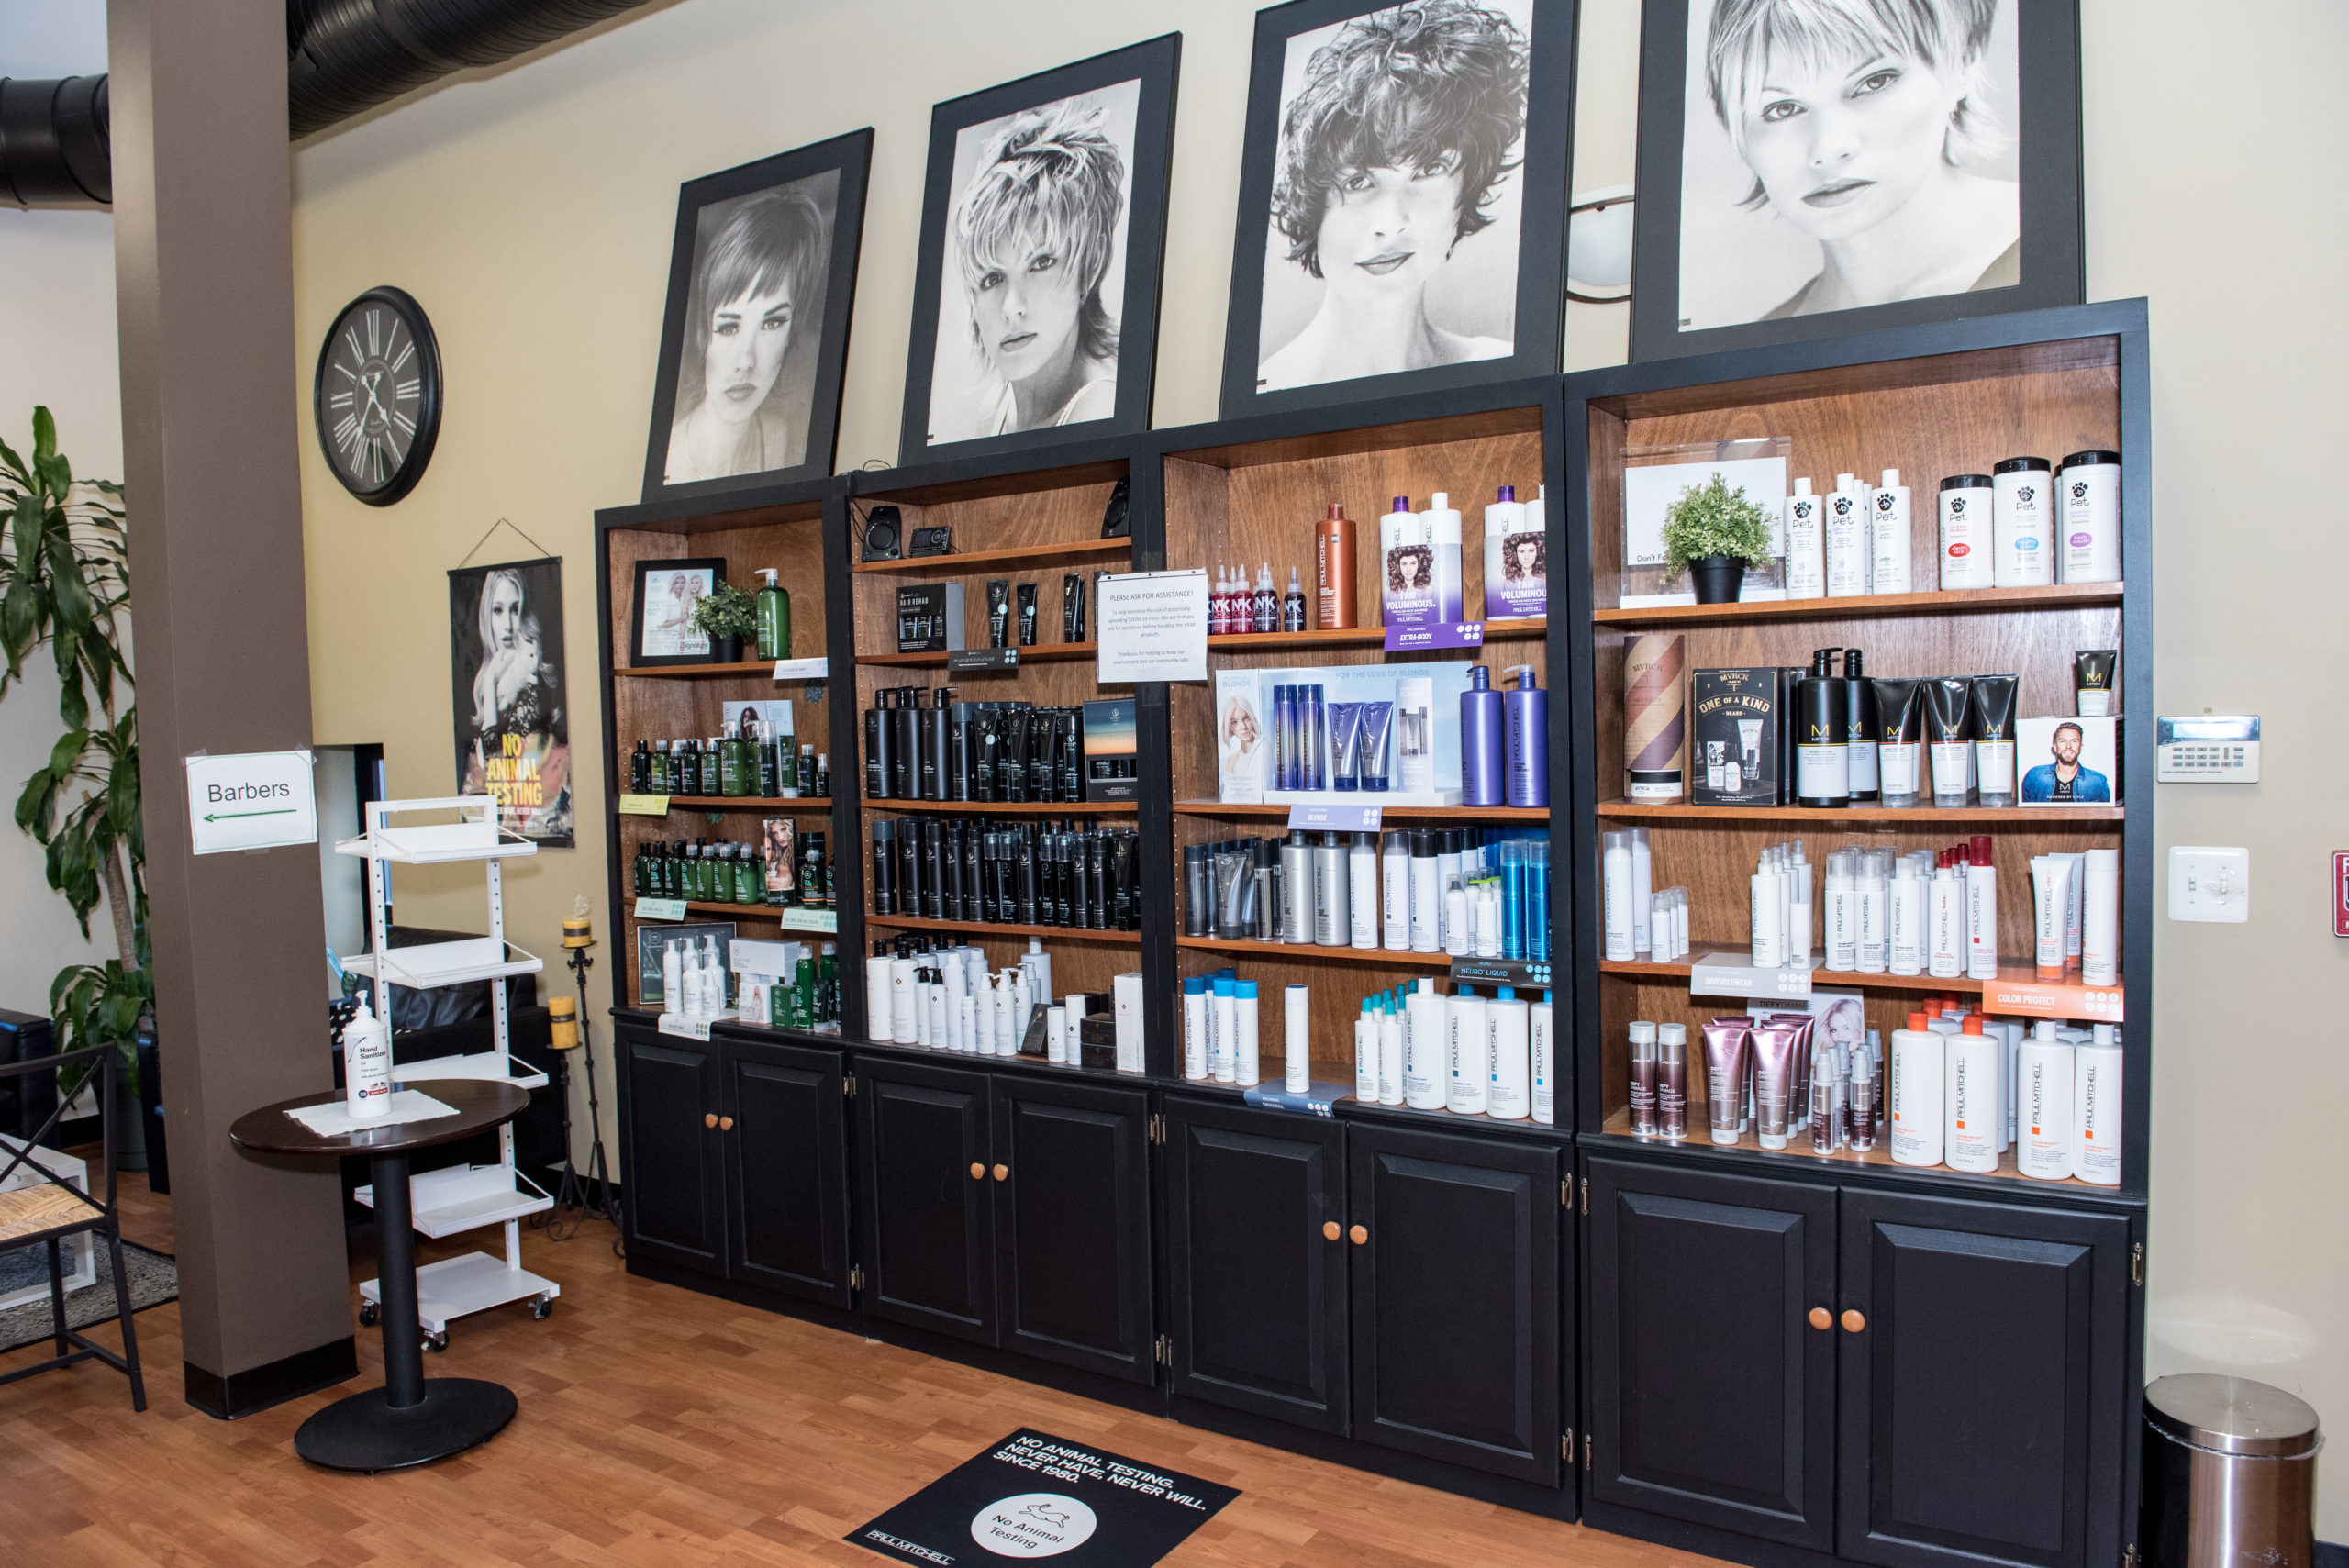 Signature Salon Pro's shelf of beauty and hair products.